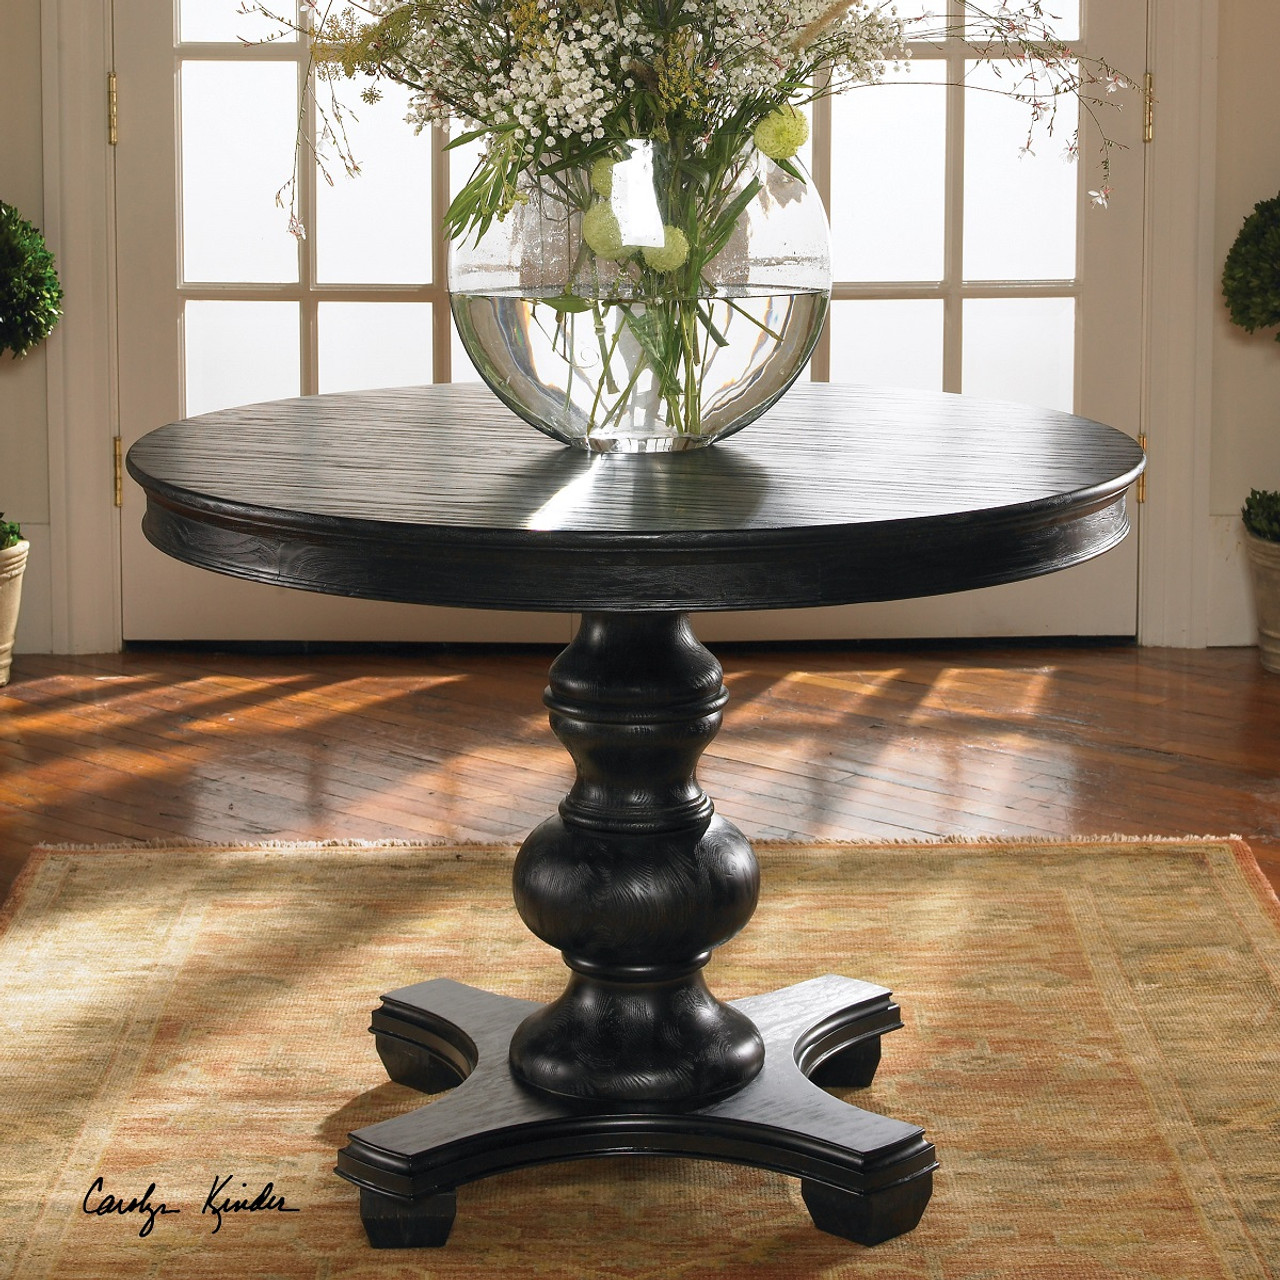 https://cdn11.bigcommerce.com/s-42eba/images/stencil/1280x1280/products/2790/10008/Brynmore_Black_Round_Pedestal_dining_Table_42__89585.1510960569.jpg?c=2